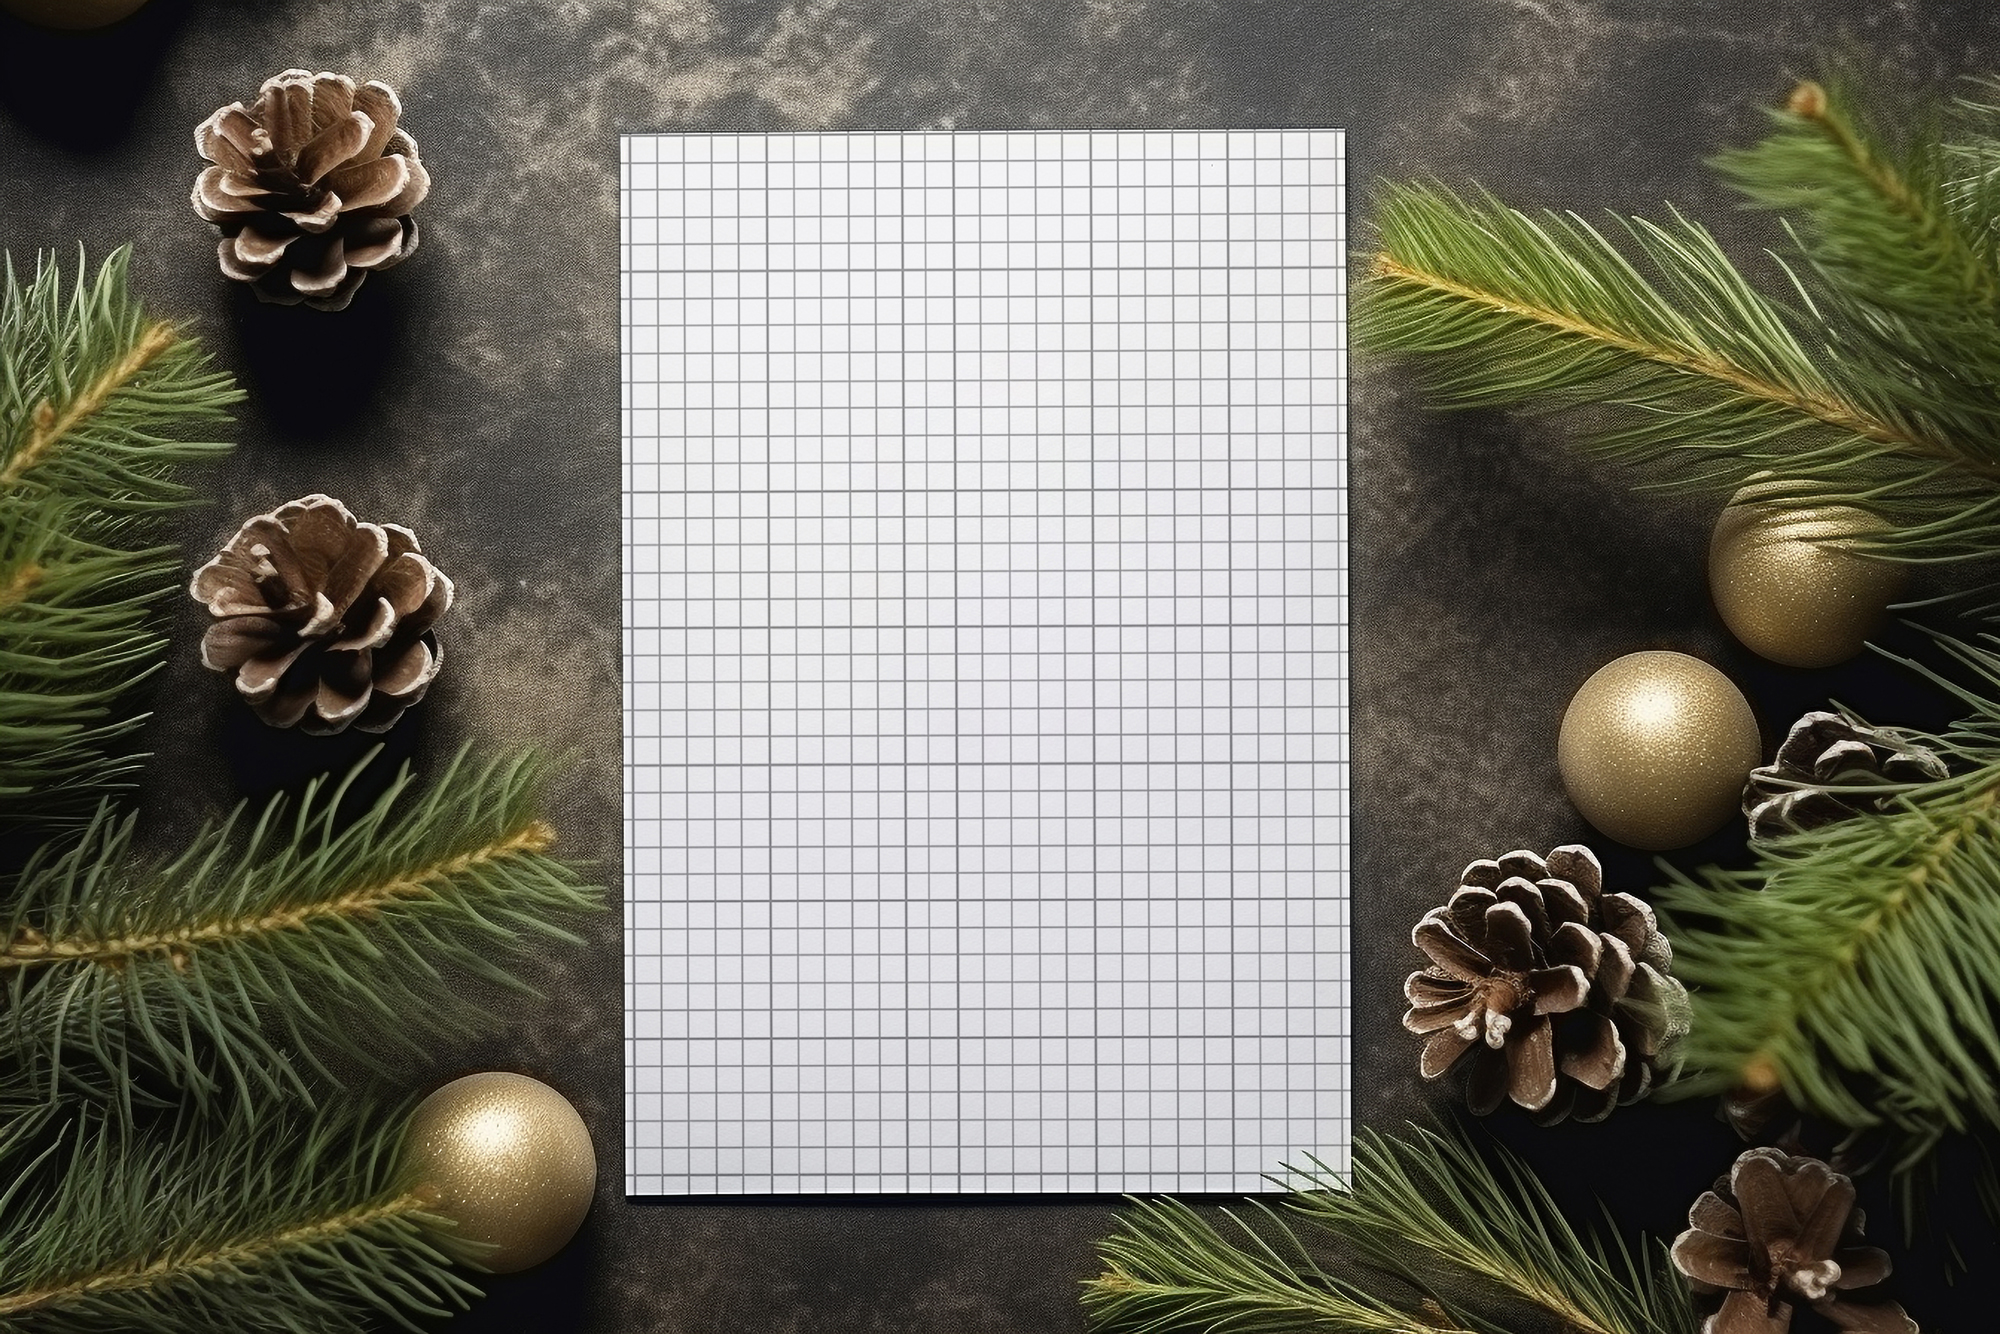 Free Download Christmas Card Mockup with Christmas Decoration